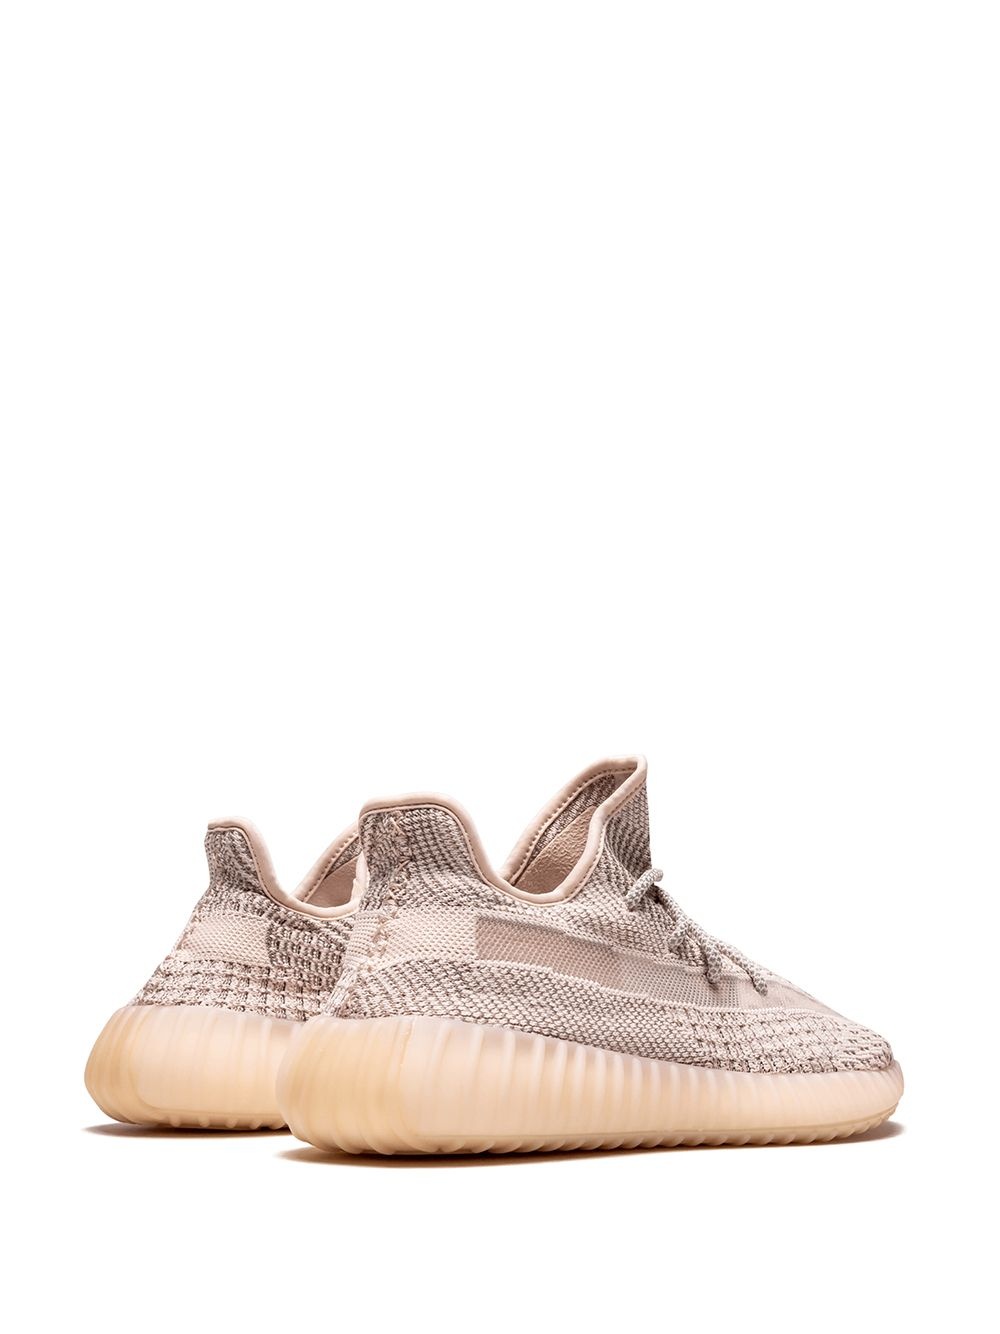 Yeezy Boost 350 V2 "Synth - Reflective" - 3